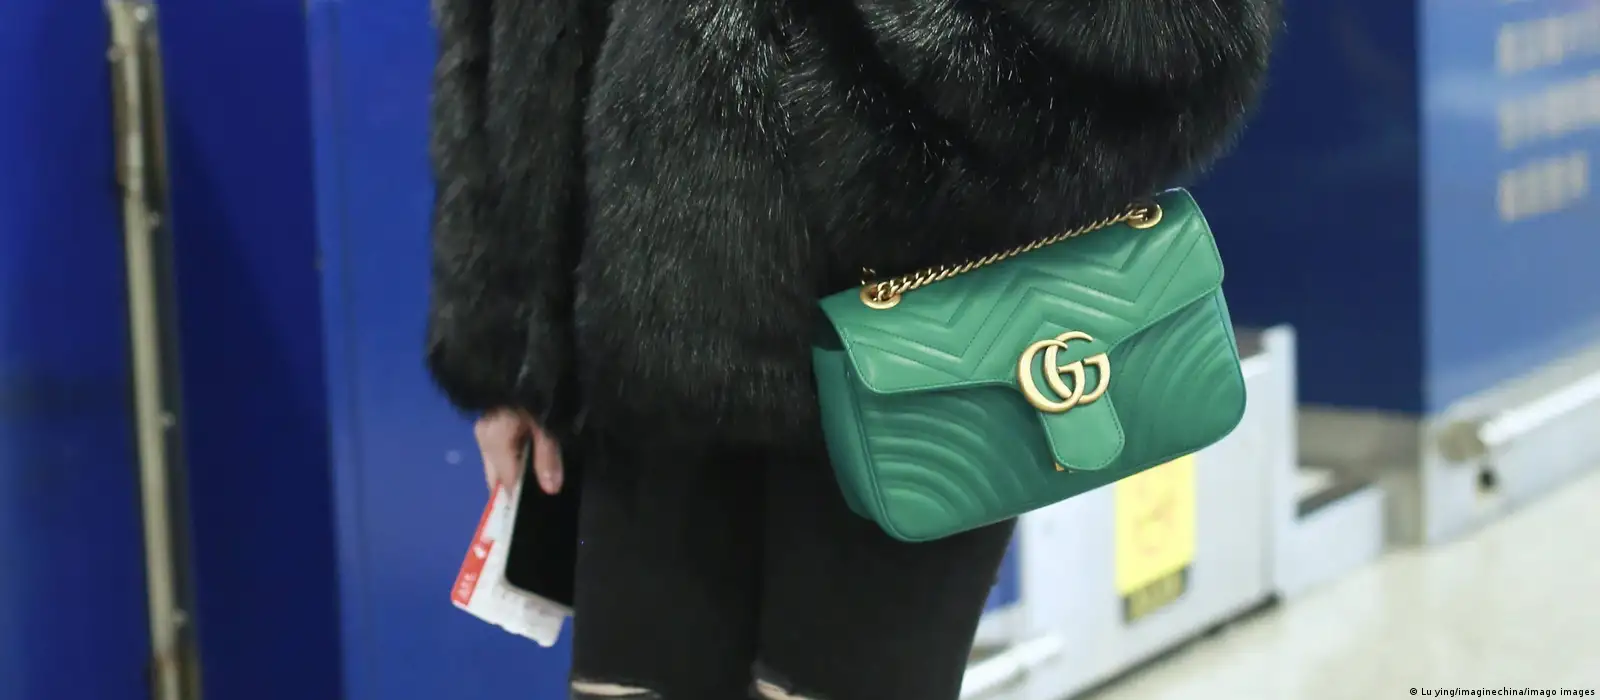 Luxury Purchases Market is Booming Worldwide with Gucci